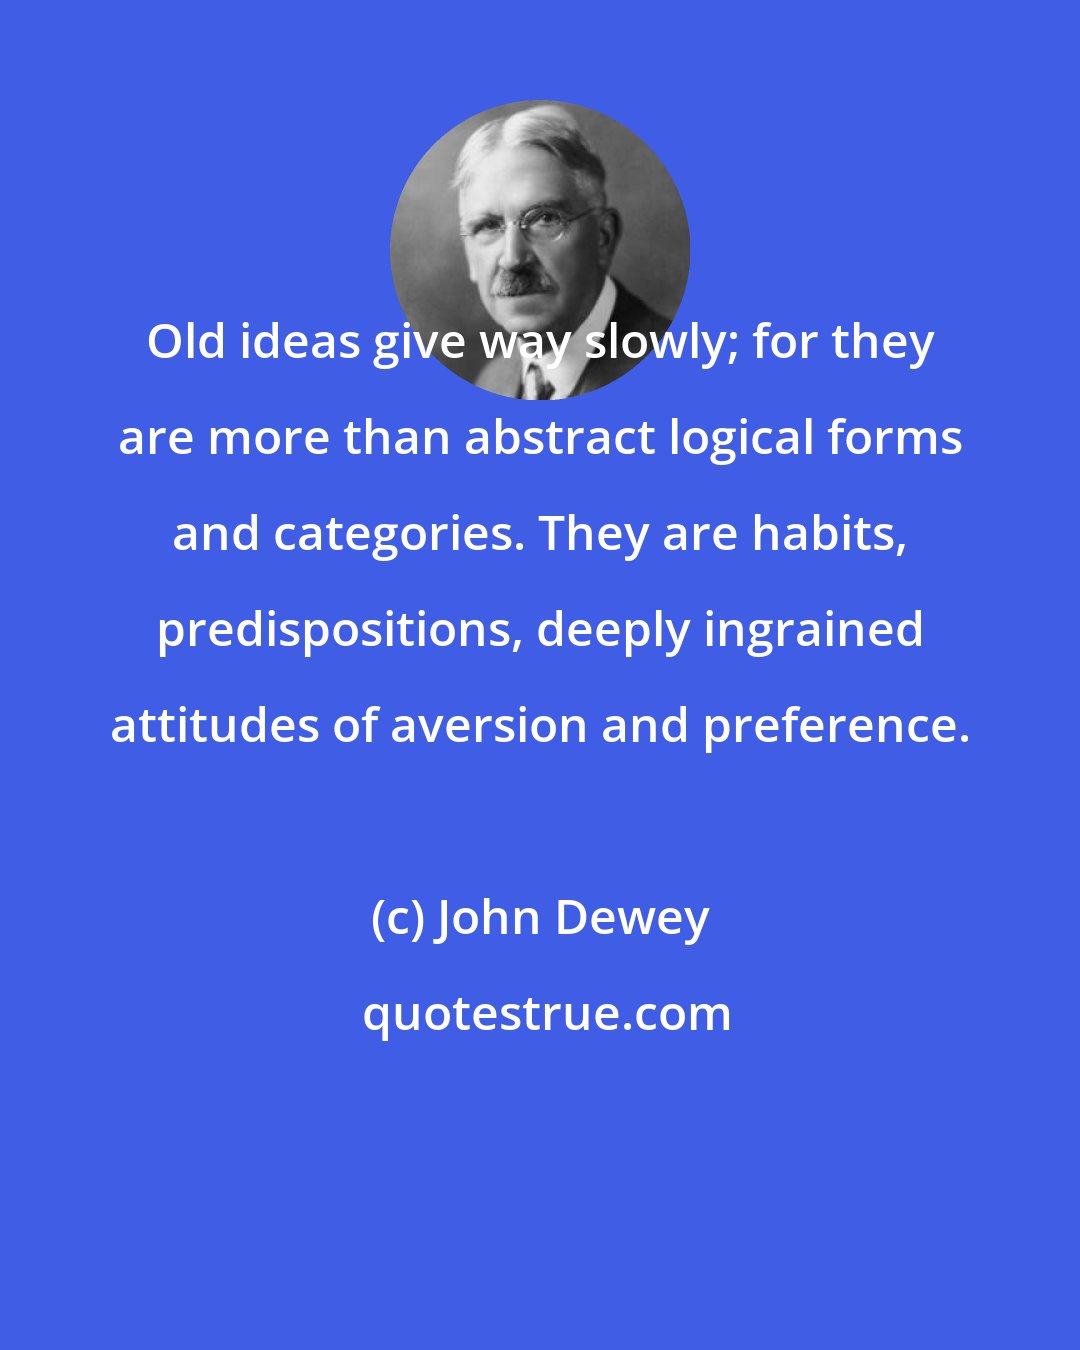 John Dewey: Old ideas give way slowly; for they are more than abstract logical forms and categories. They are habits, predispositions, deeply ingrained attitudes of aversion and preference.